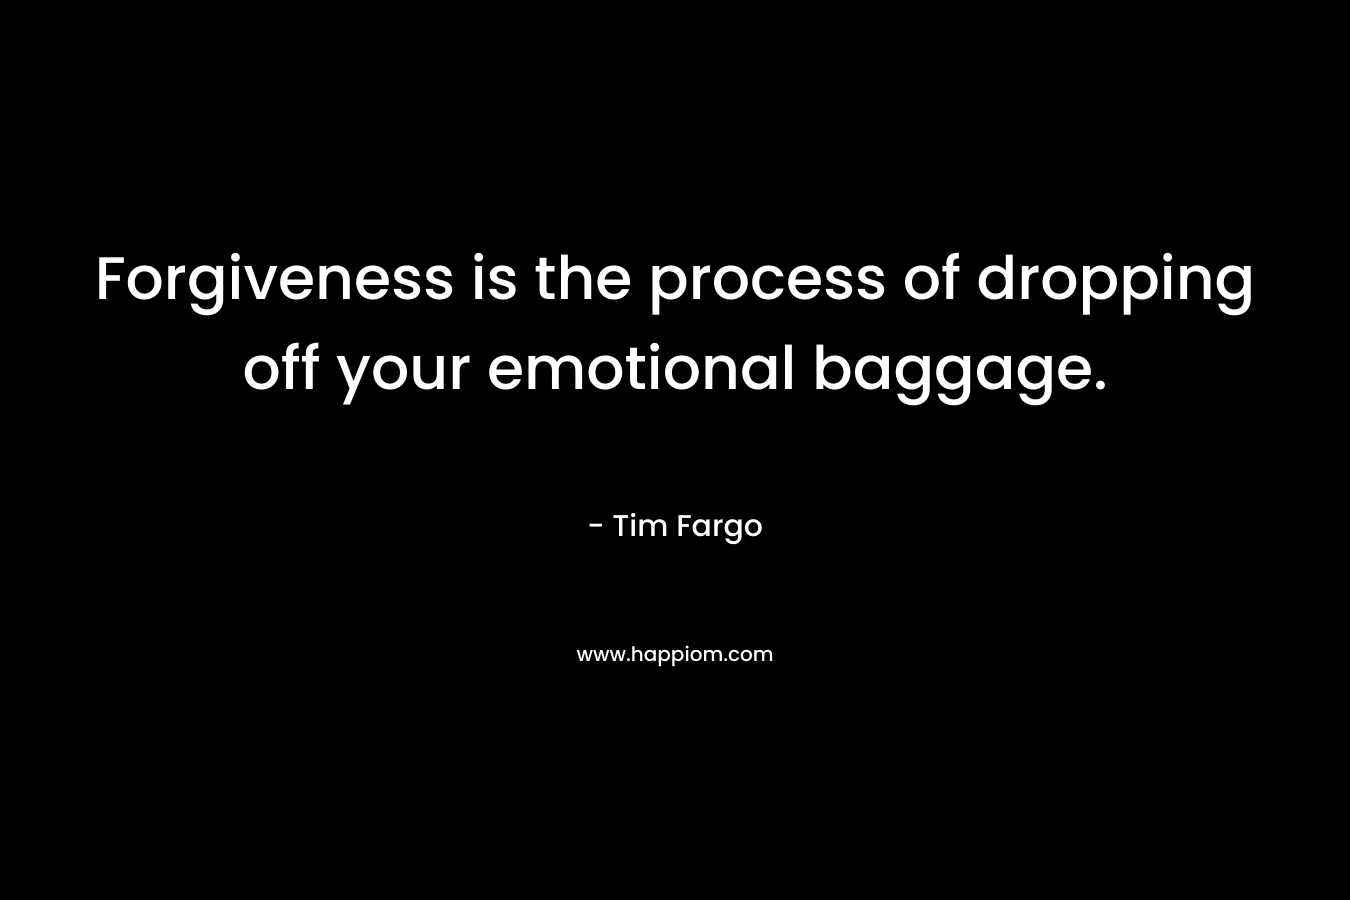 Forgiveness is the process of dropping off your emotional baggage. – Tim Fargo